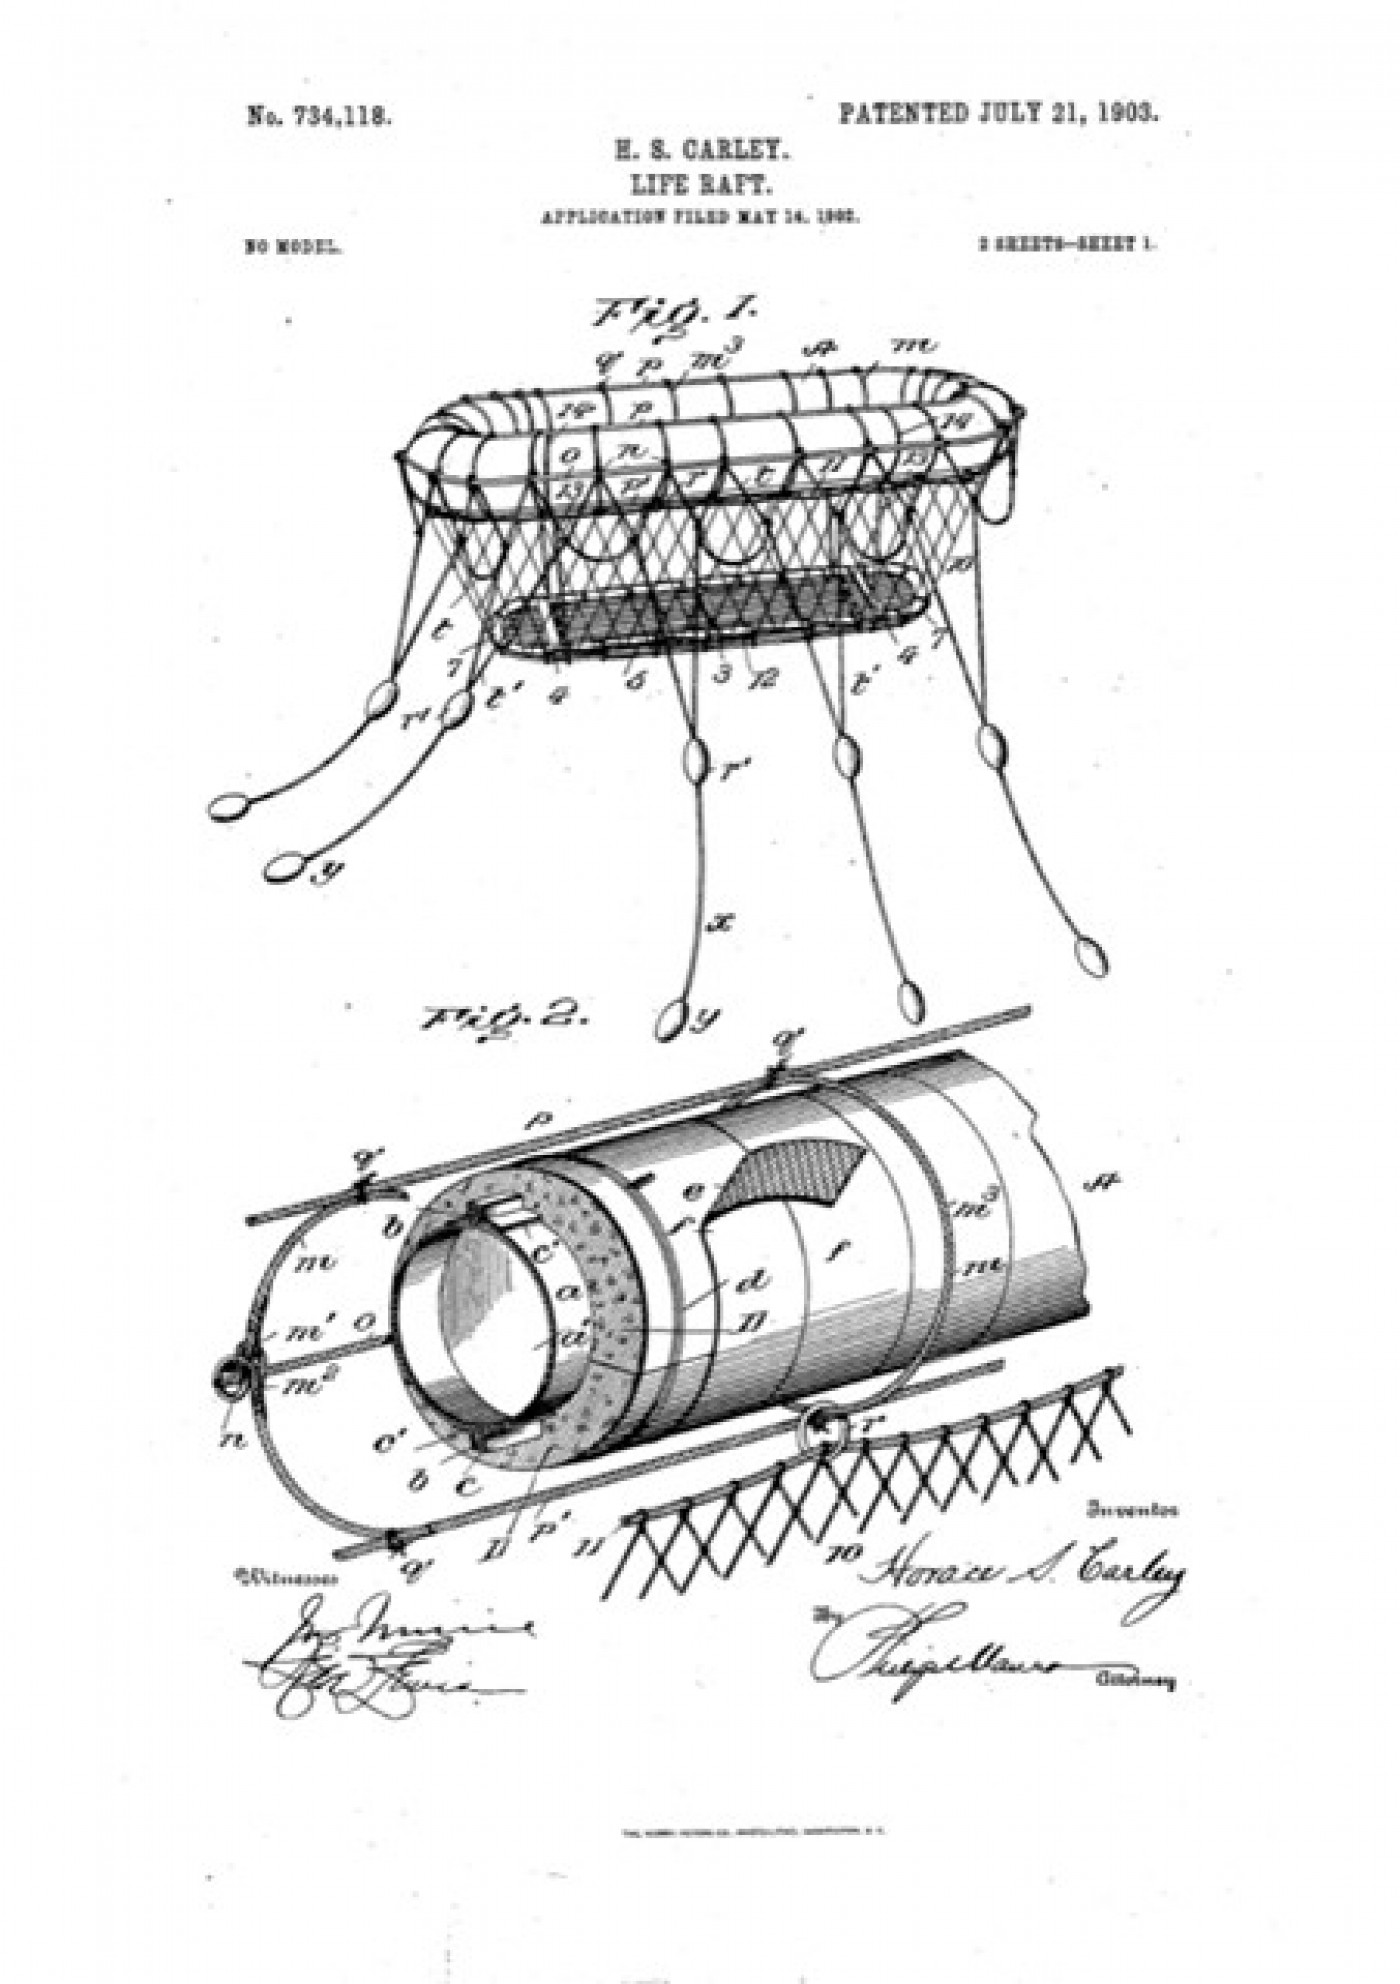 Illustration from 1903 US Patent 734118 for the Carley Life Raft, in public domain